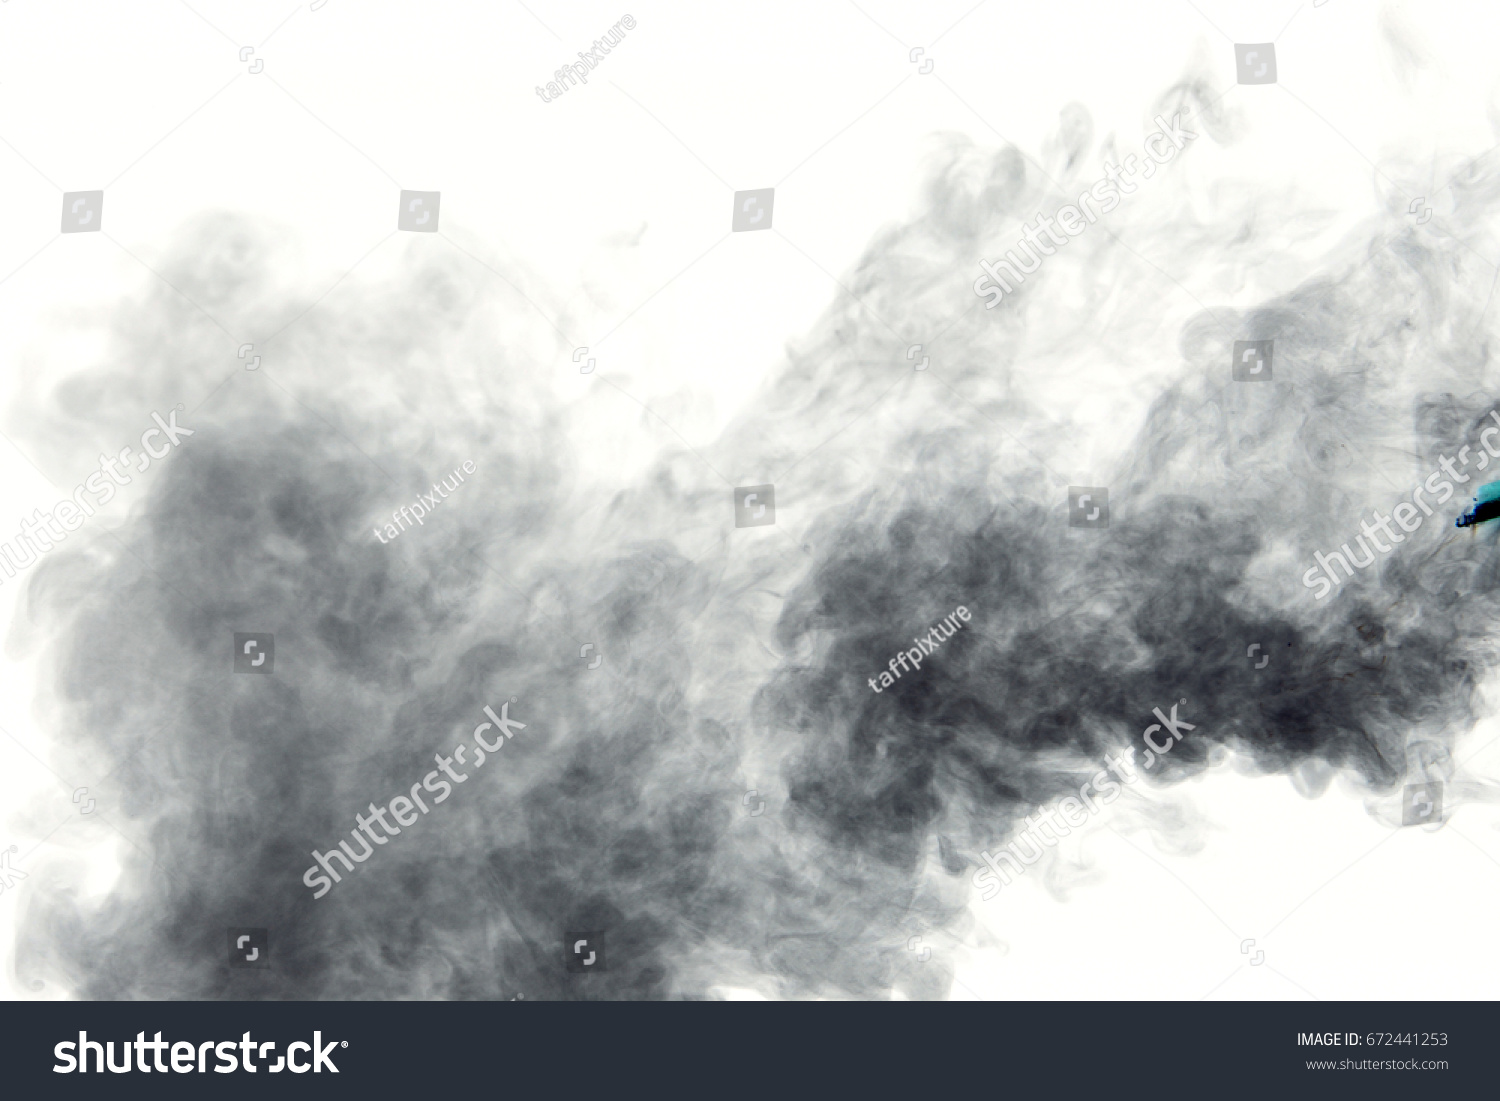 Smoke background / Smoke is a collection of airborne solid and liquid particulates and gases emitted when a material undergoes combustion #672441253